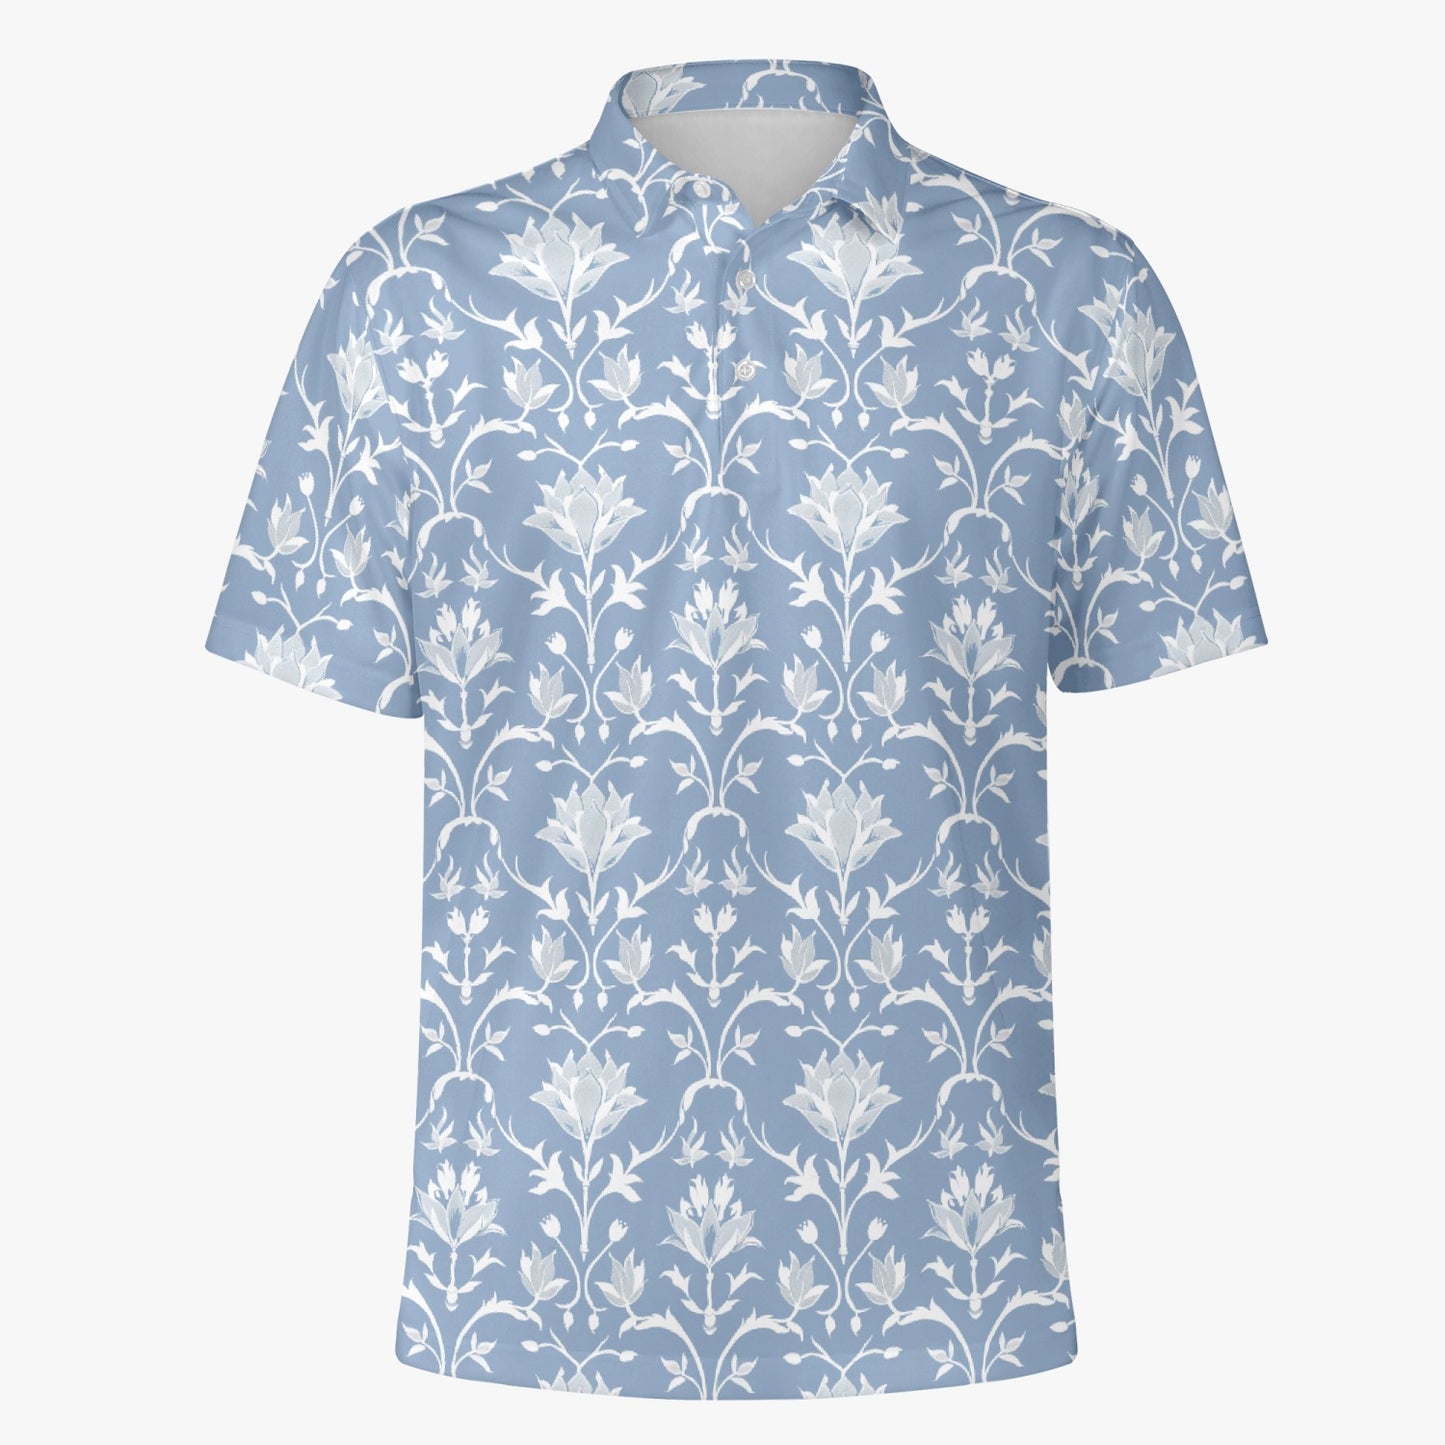 Inspired by Wedgwood Polo Shirt